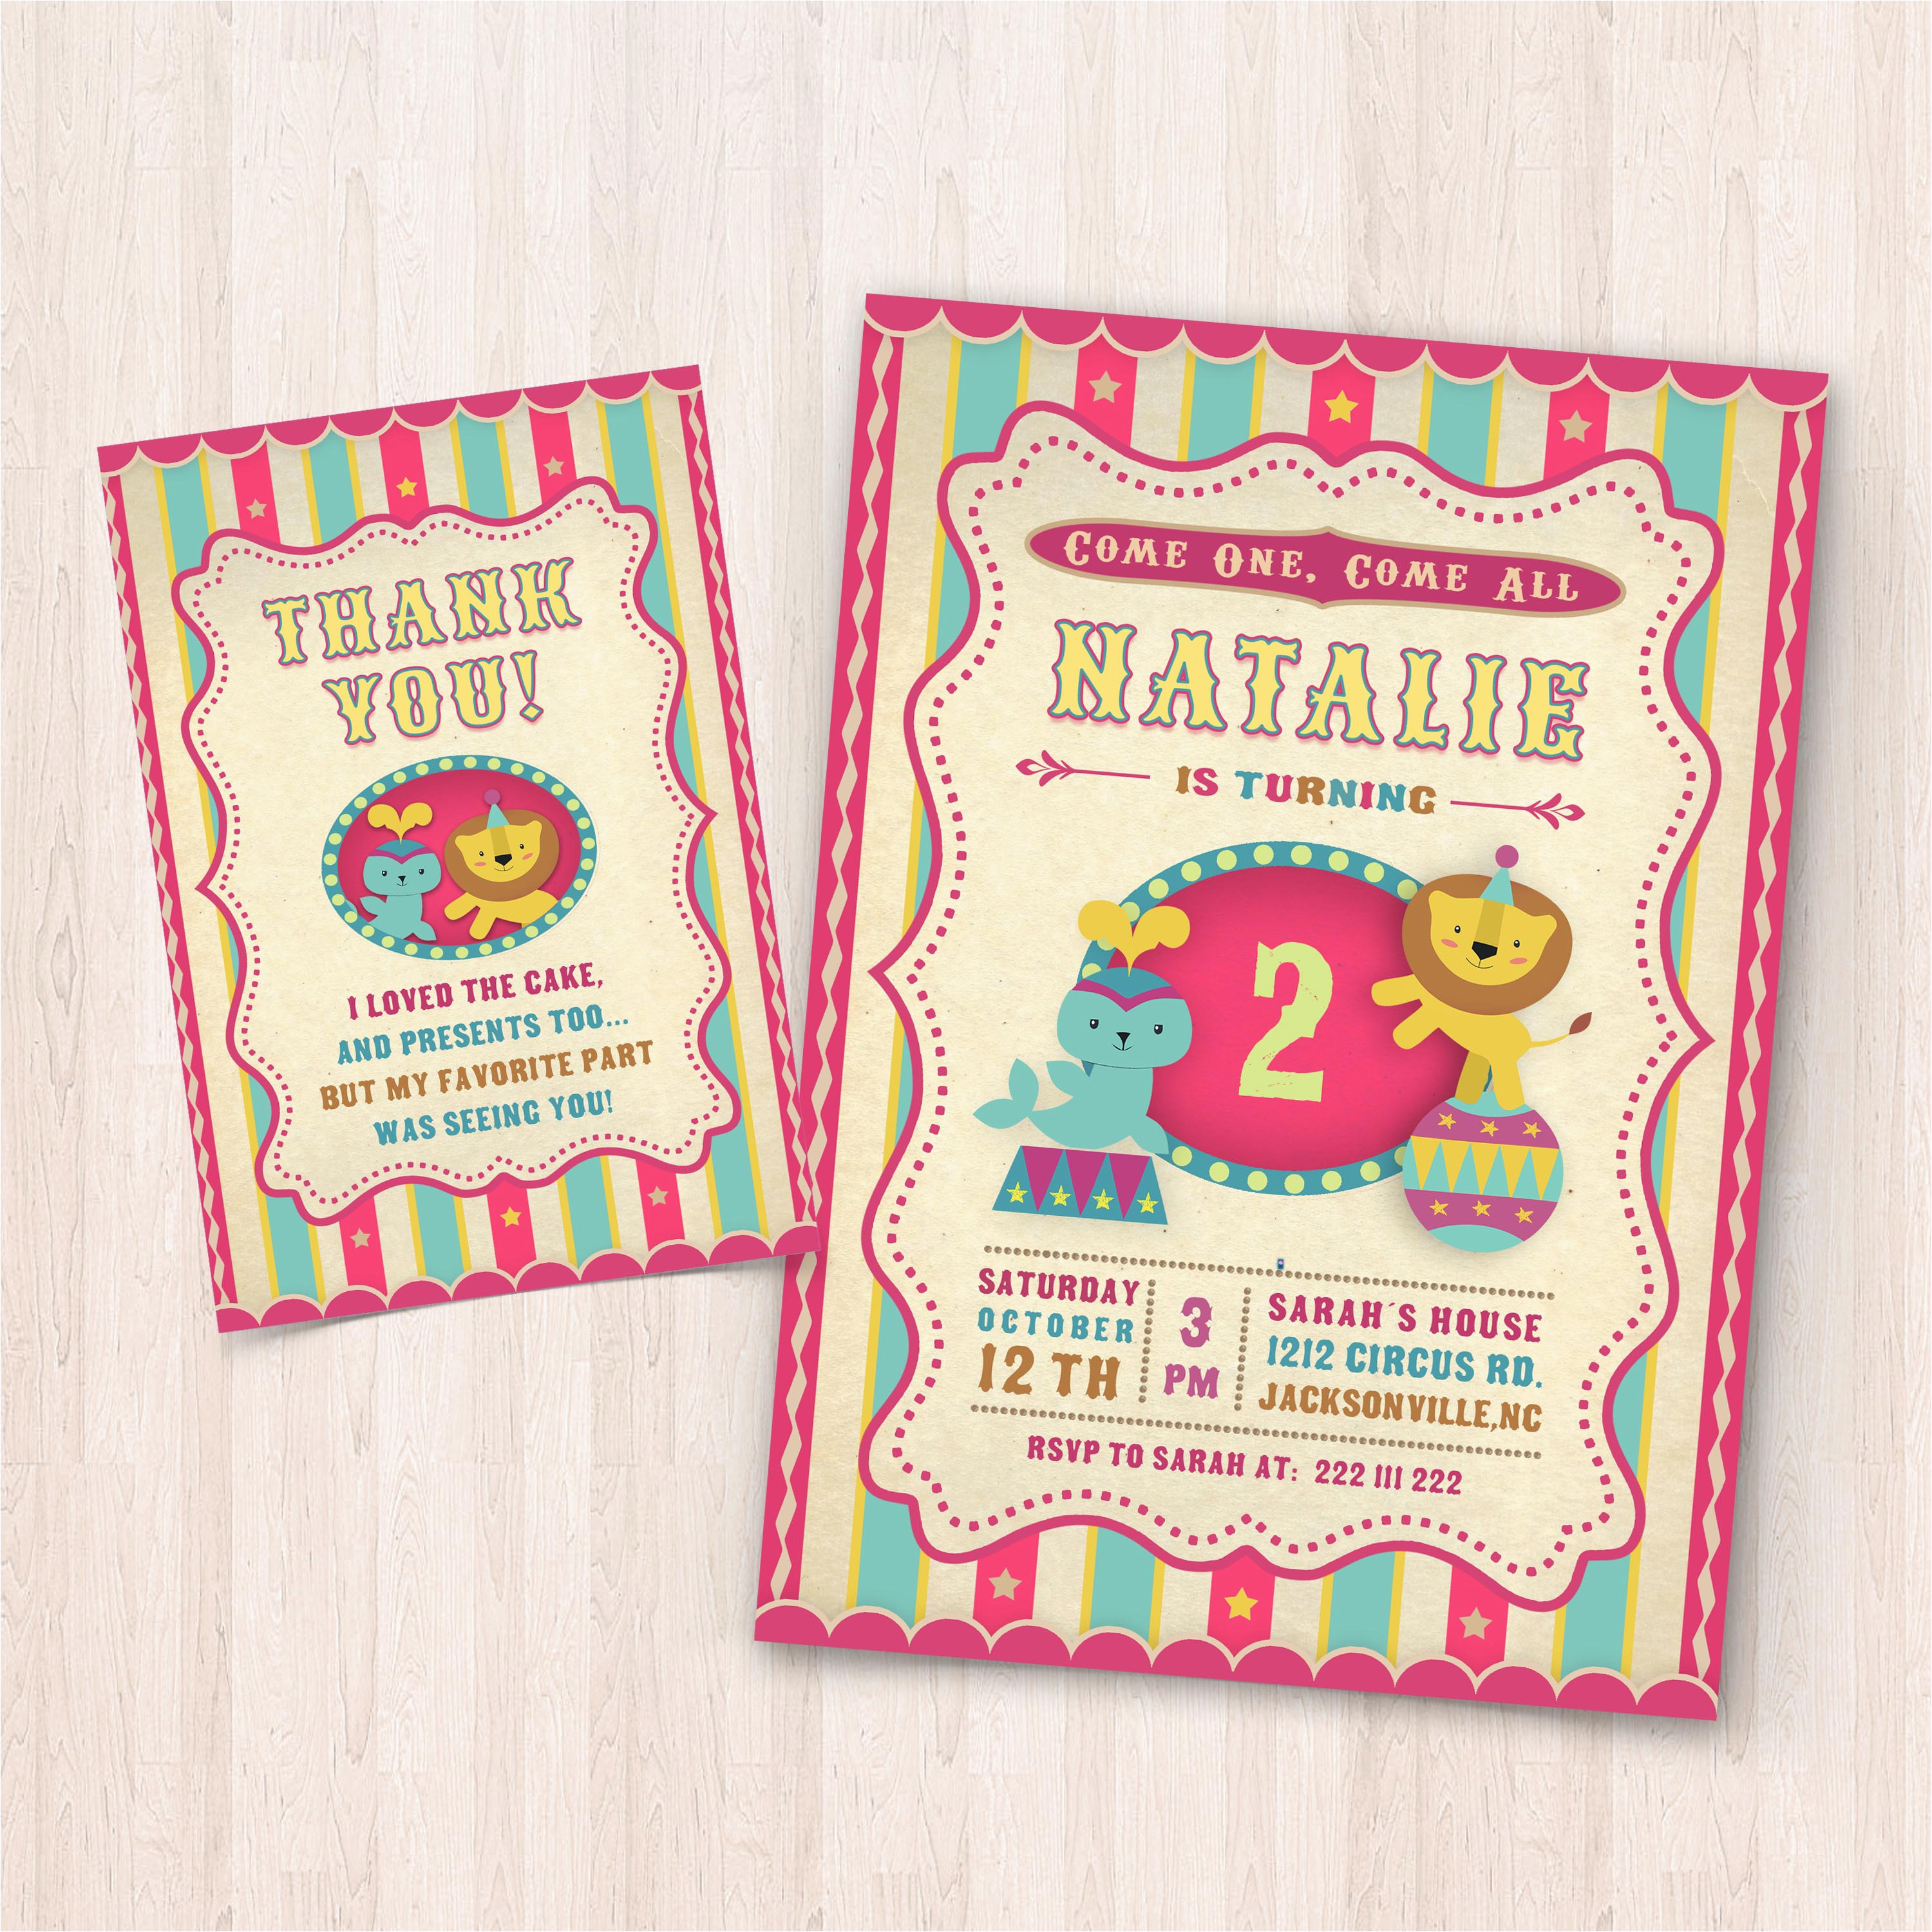 printable circus birthday invitations free thank you cards to print at home